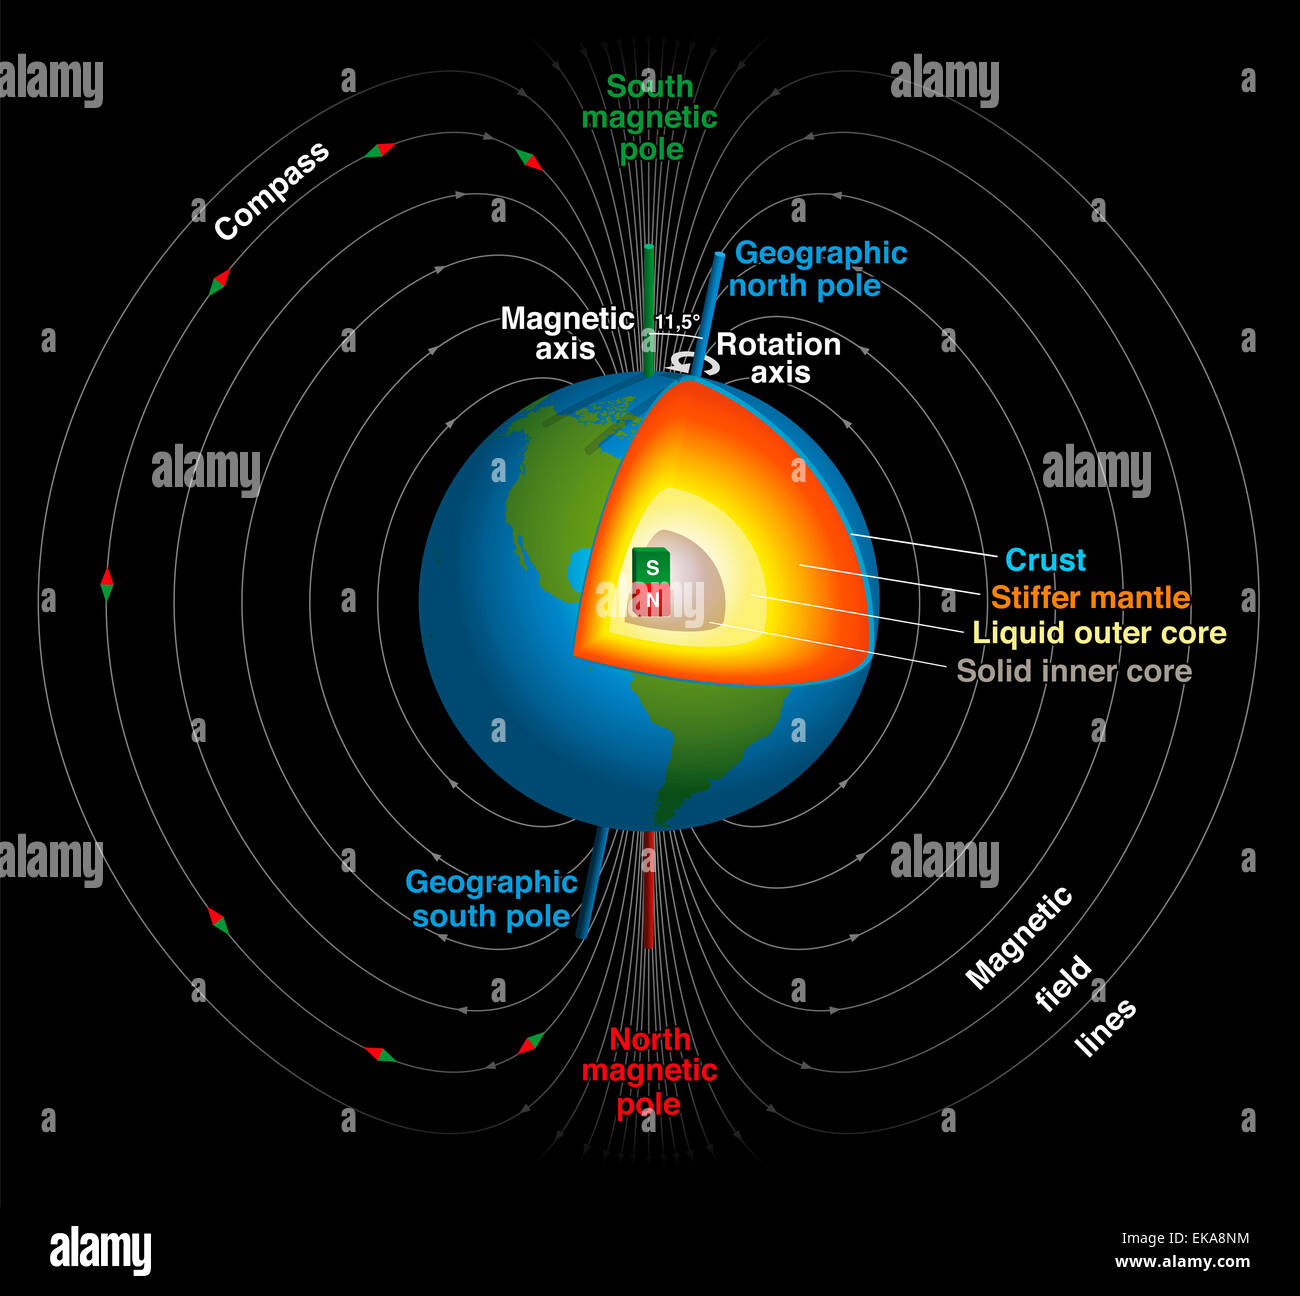 Earth's magnetic field, geographic and magnetic north and south pole, magnetic axis and rotation axis and  planets inner core. Stock Photo